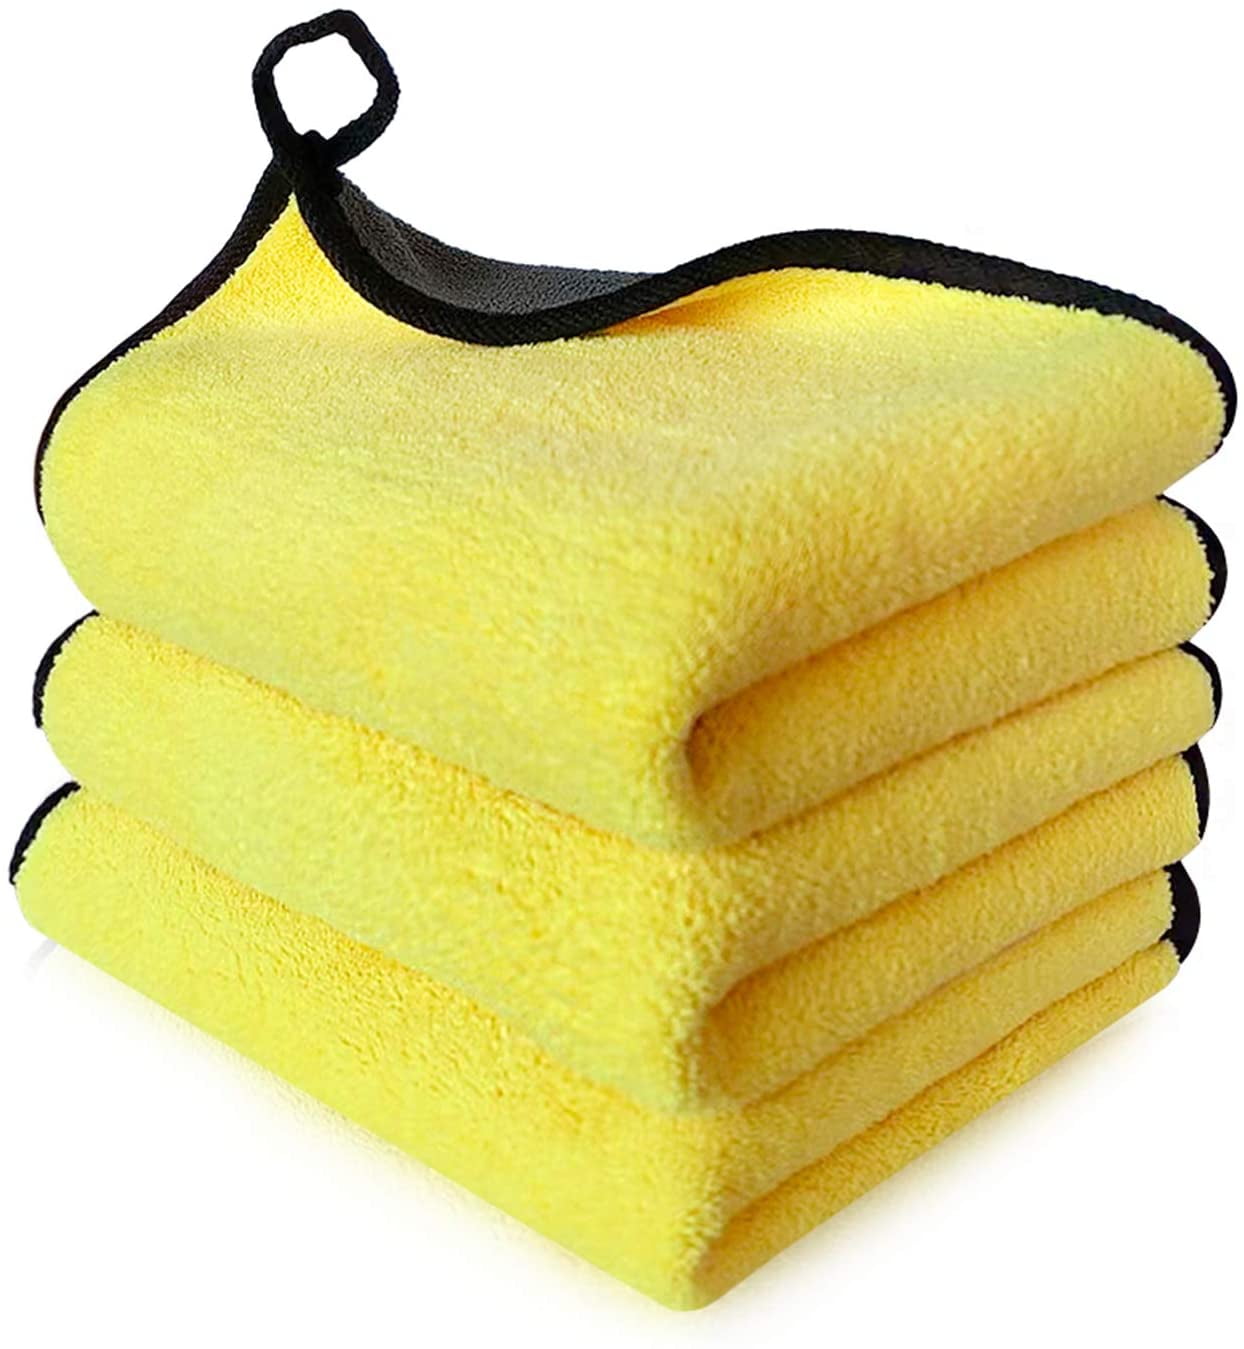 300gsm extra thick Cleaning Towels Kitchen Edenstar Microfiber Cleaning Cloths 12'' x 28'' Pack of 3 Window Cleaning Rags Home Wash Cloth for Car Soft Microfiber Towel Strong Water Absorbent Cloth 